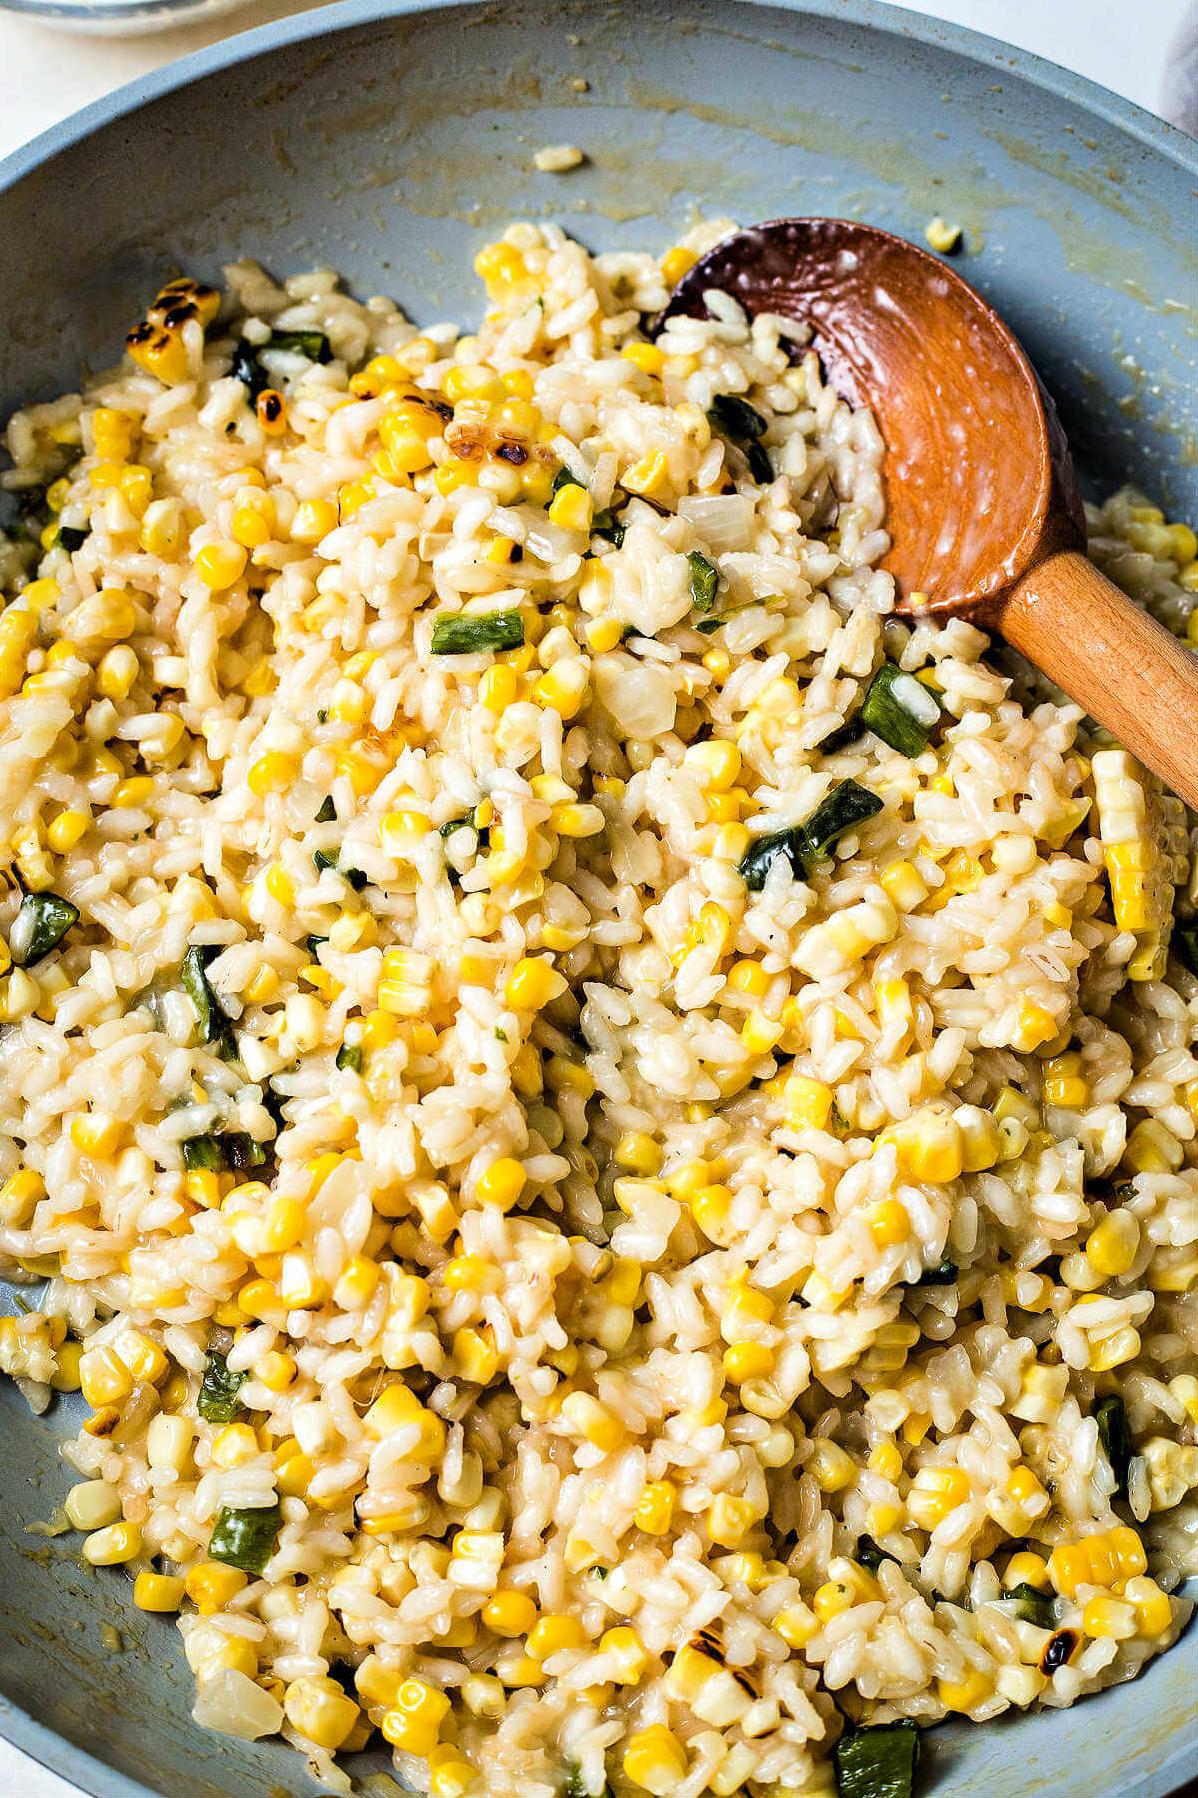  The perfect balance of spices mixed with earthy poblano peppers makes this rice dish truly special.